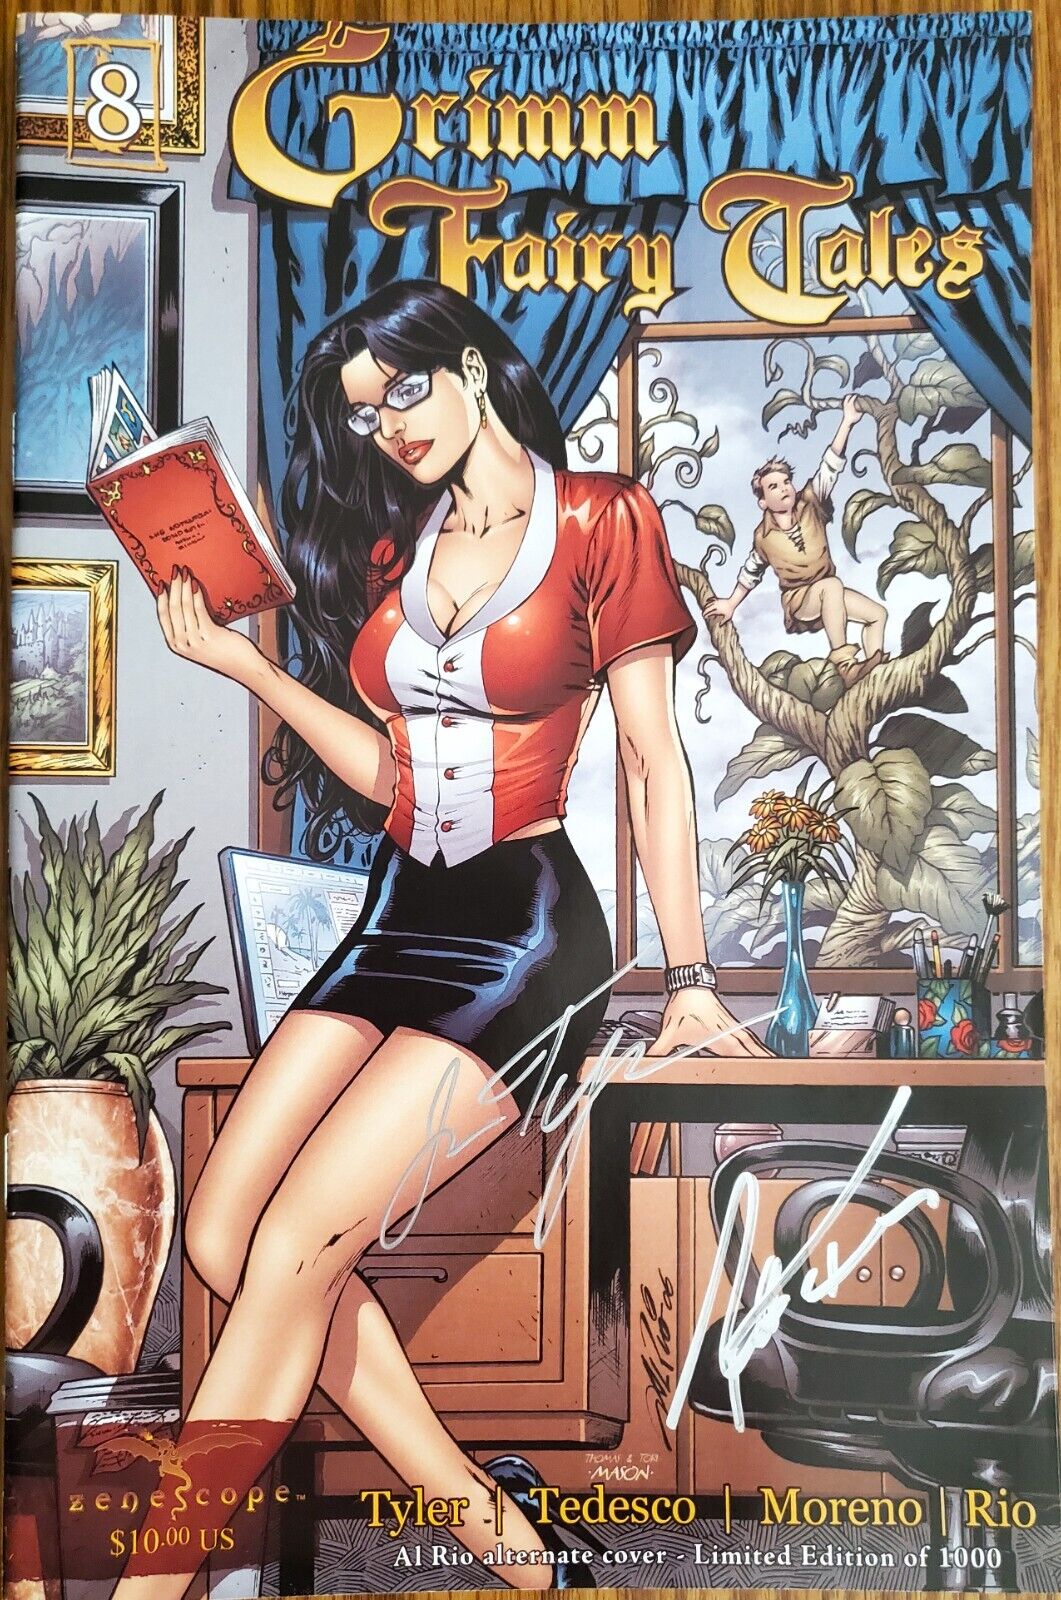 GRIMM FAIRY TALES #8 (v. 1 2005) RARE LIMITED EDITION AL RIO VARIANT - SIGNED 2X